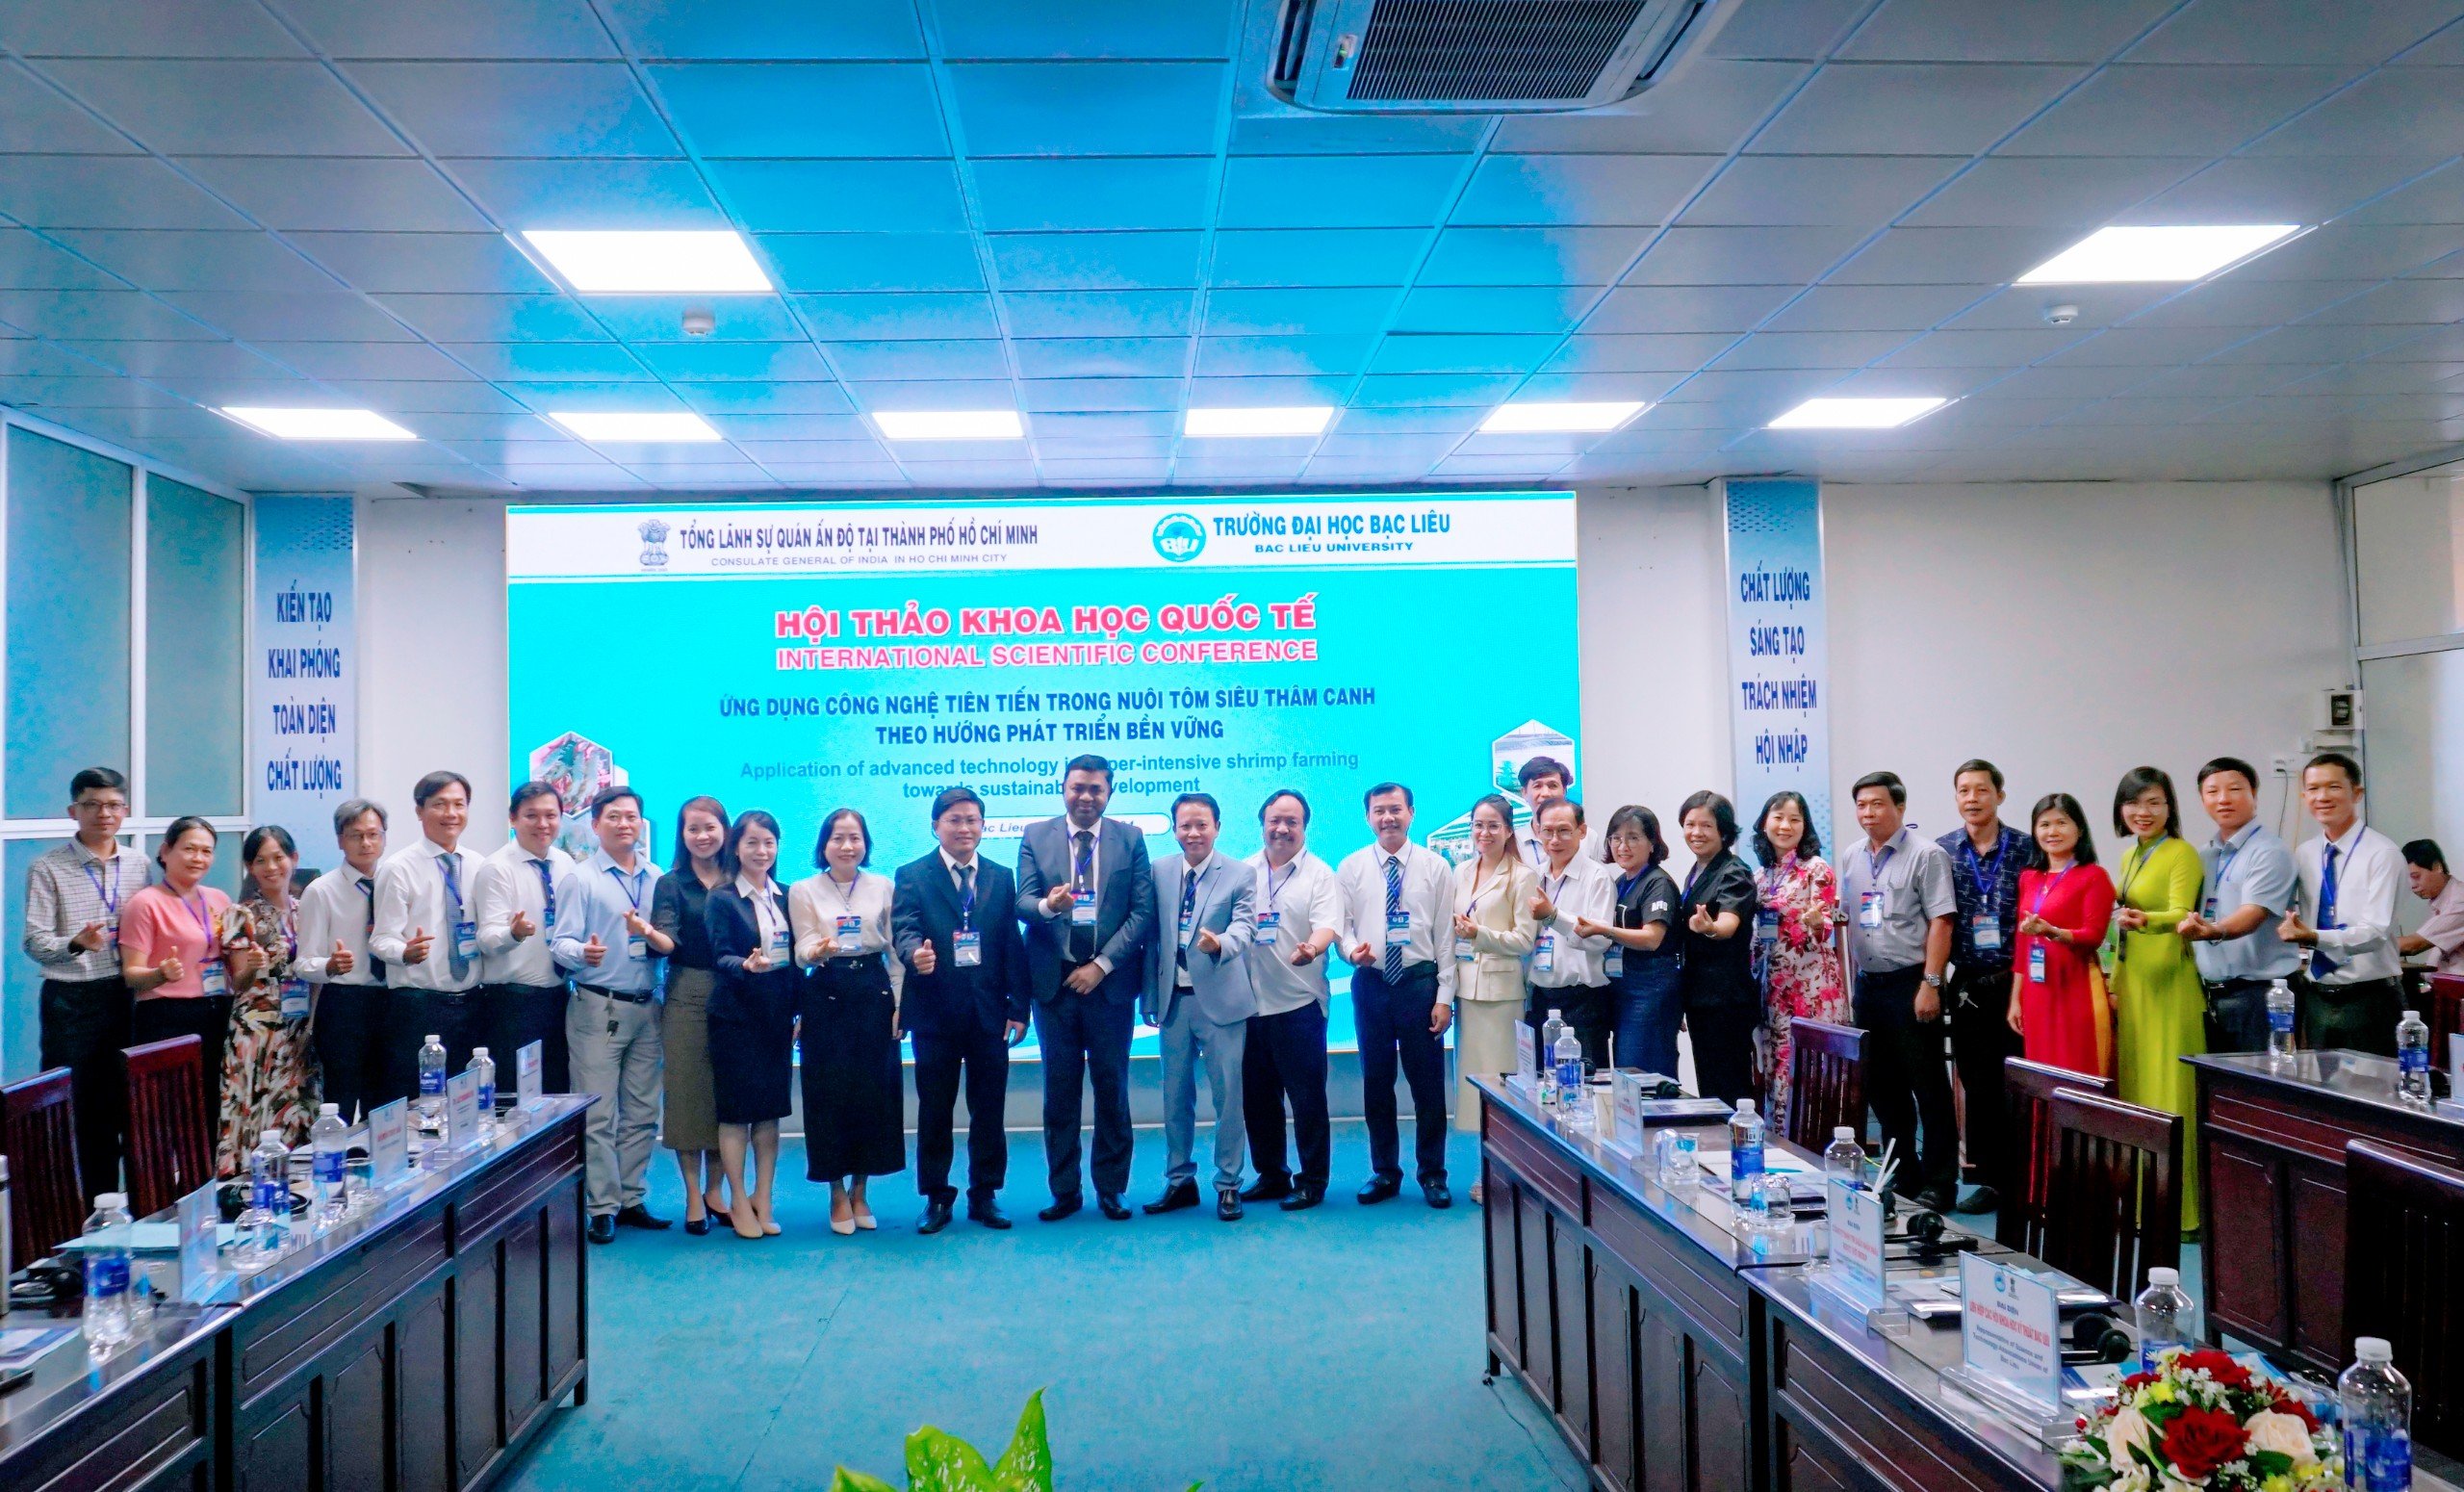 International scientific conference "Application of advanced technology in super-intensive shrimp farming towards sustainable development"